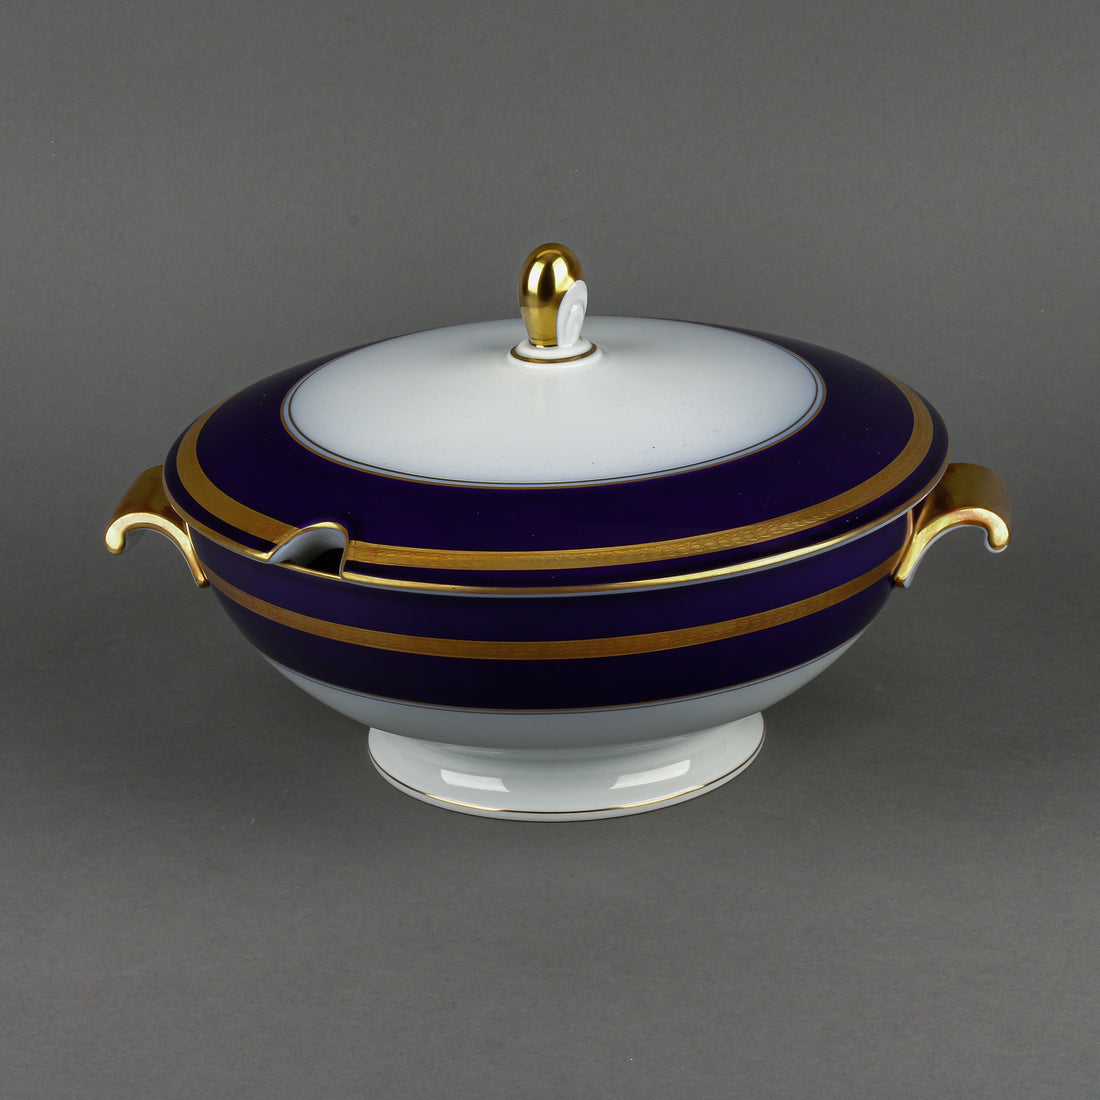 ROSENTHAL Blue & Gold Band 5107 Footed Covered Tureen